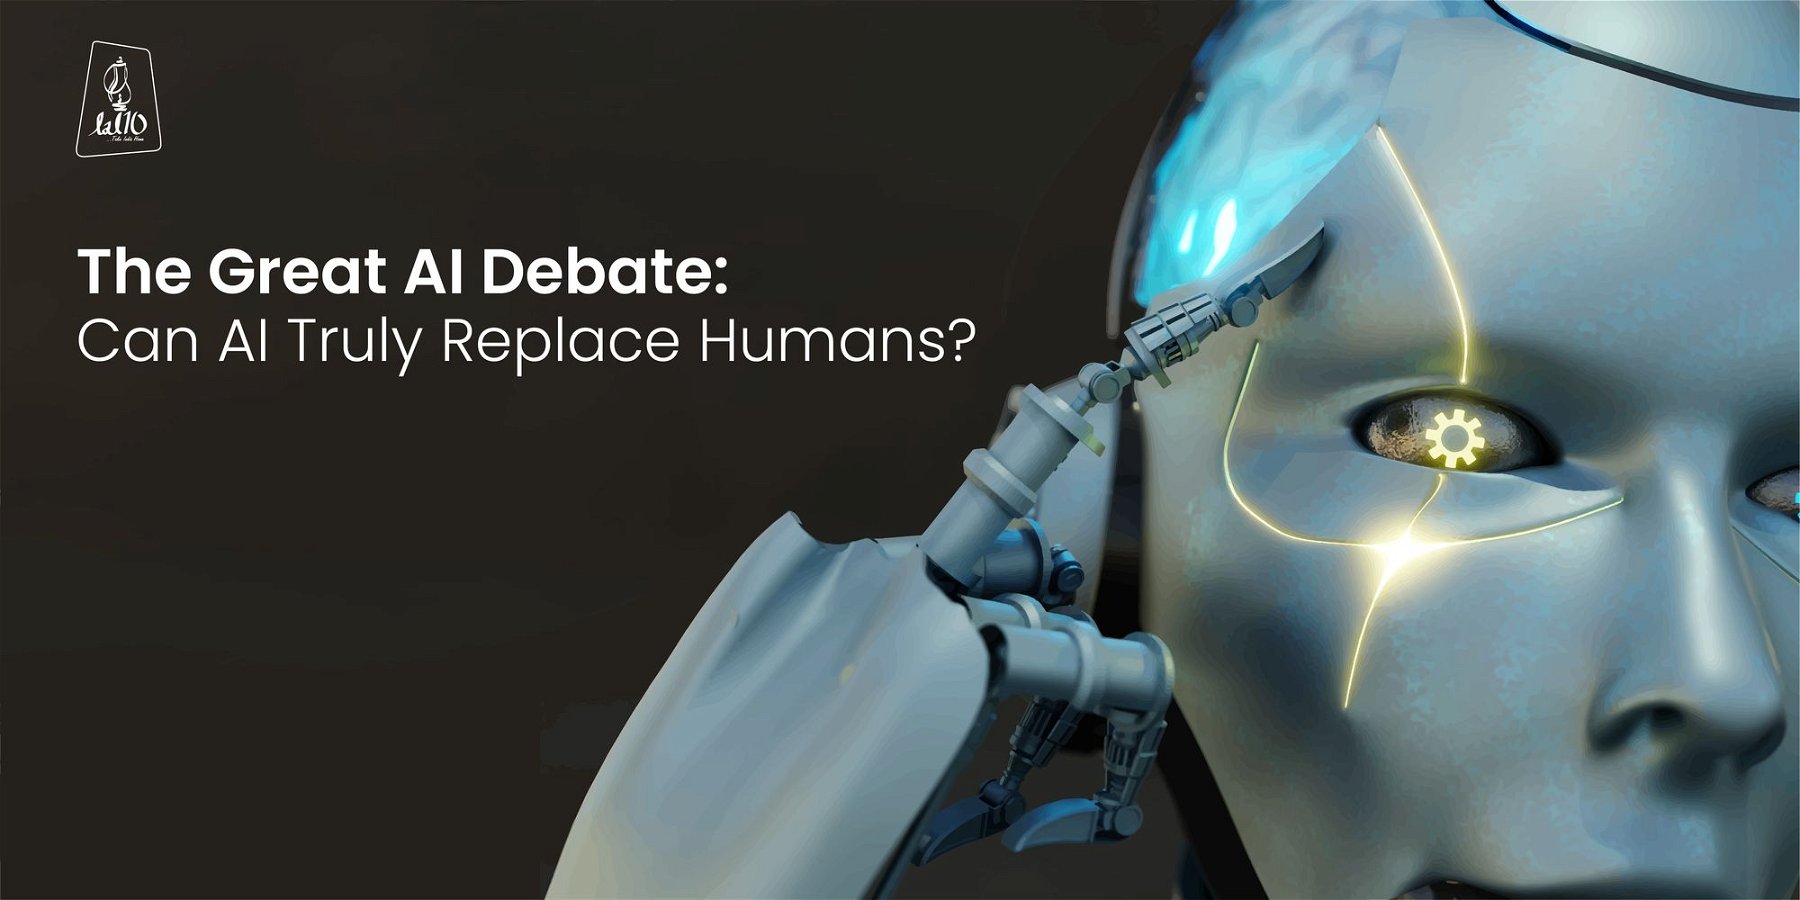 The great AI debate: Can AI truly replace humans?